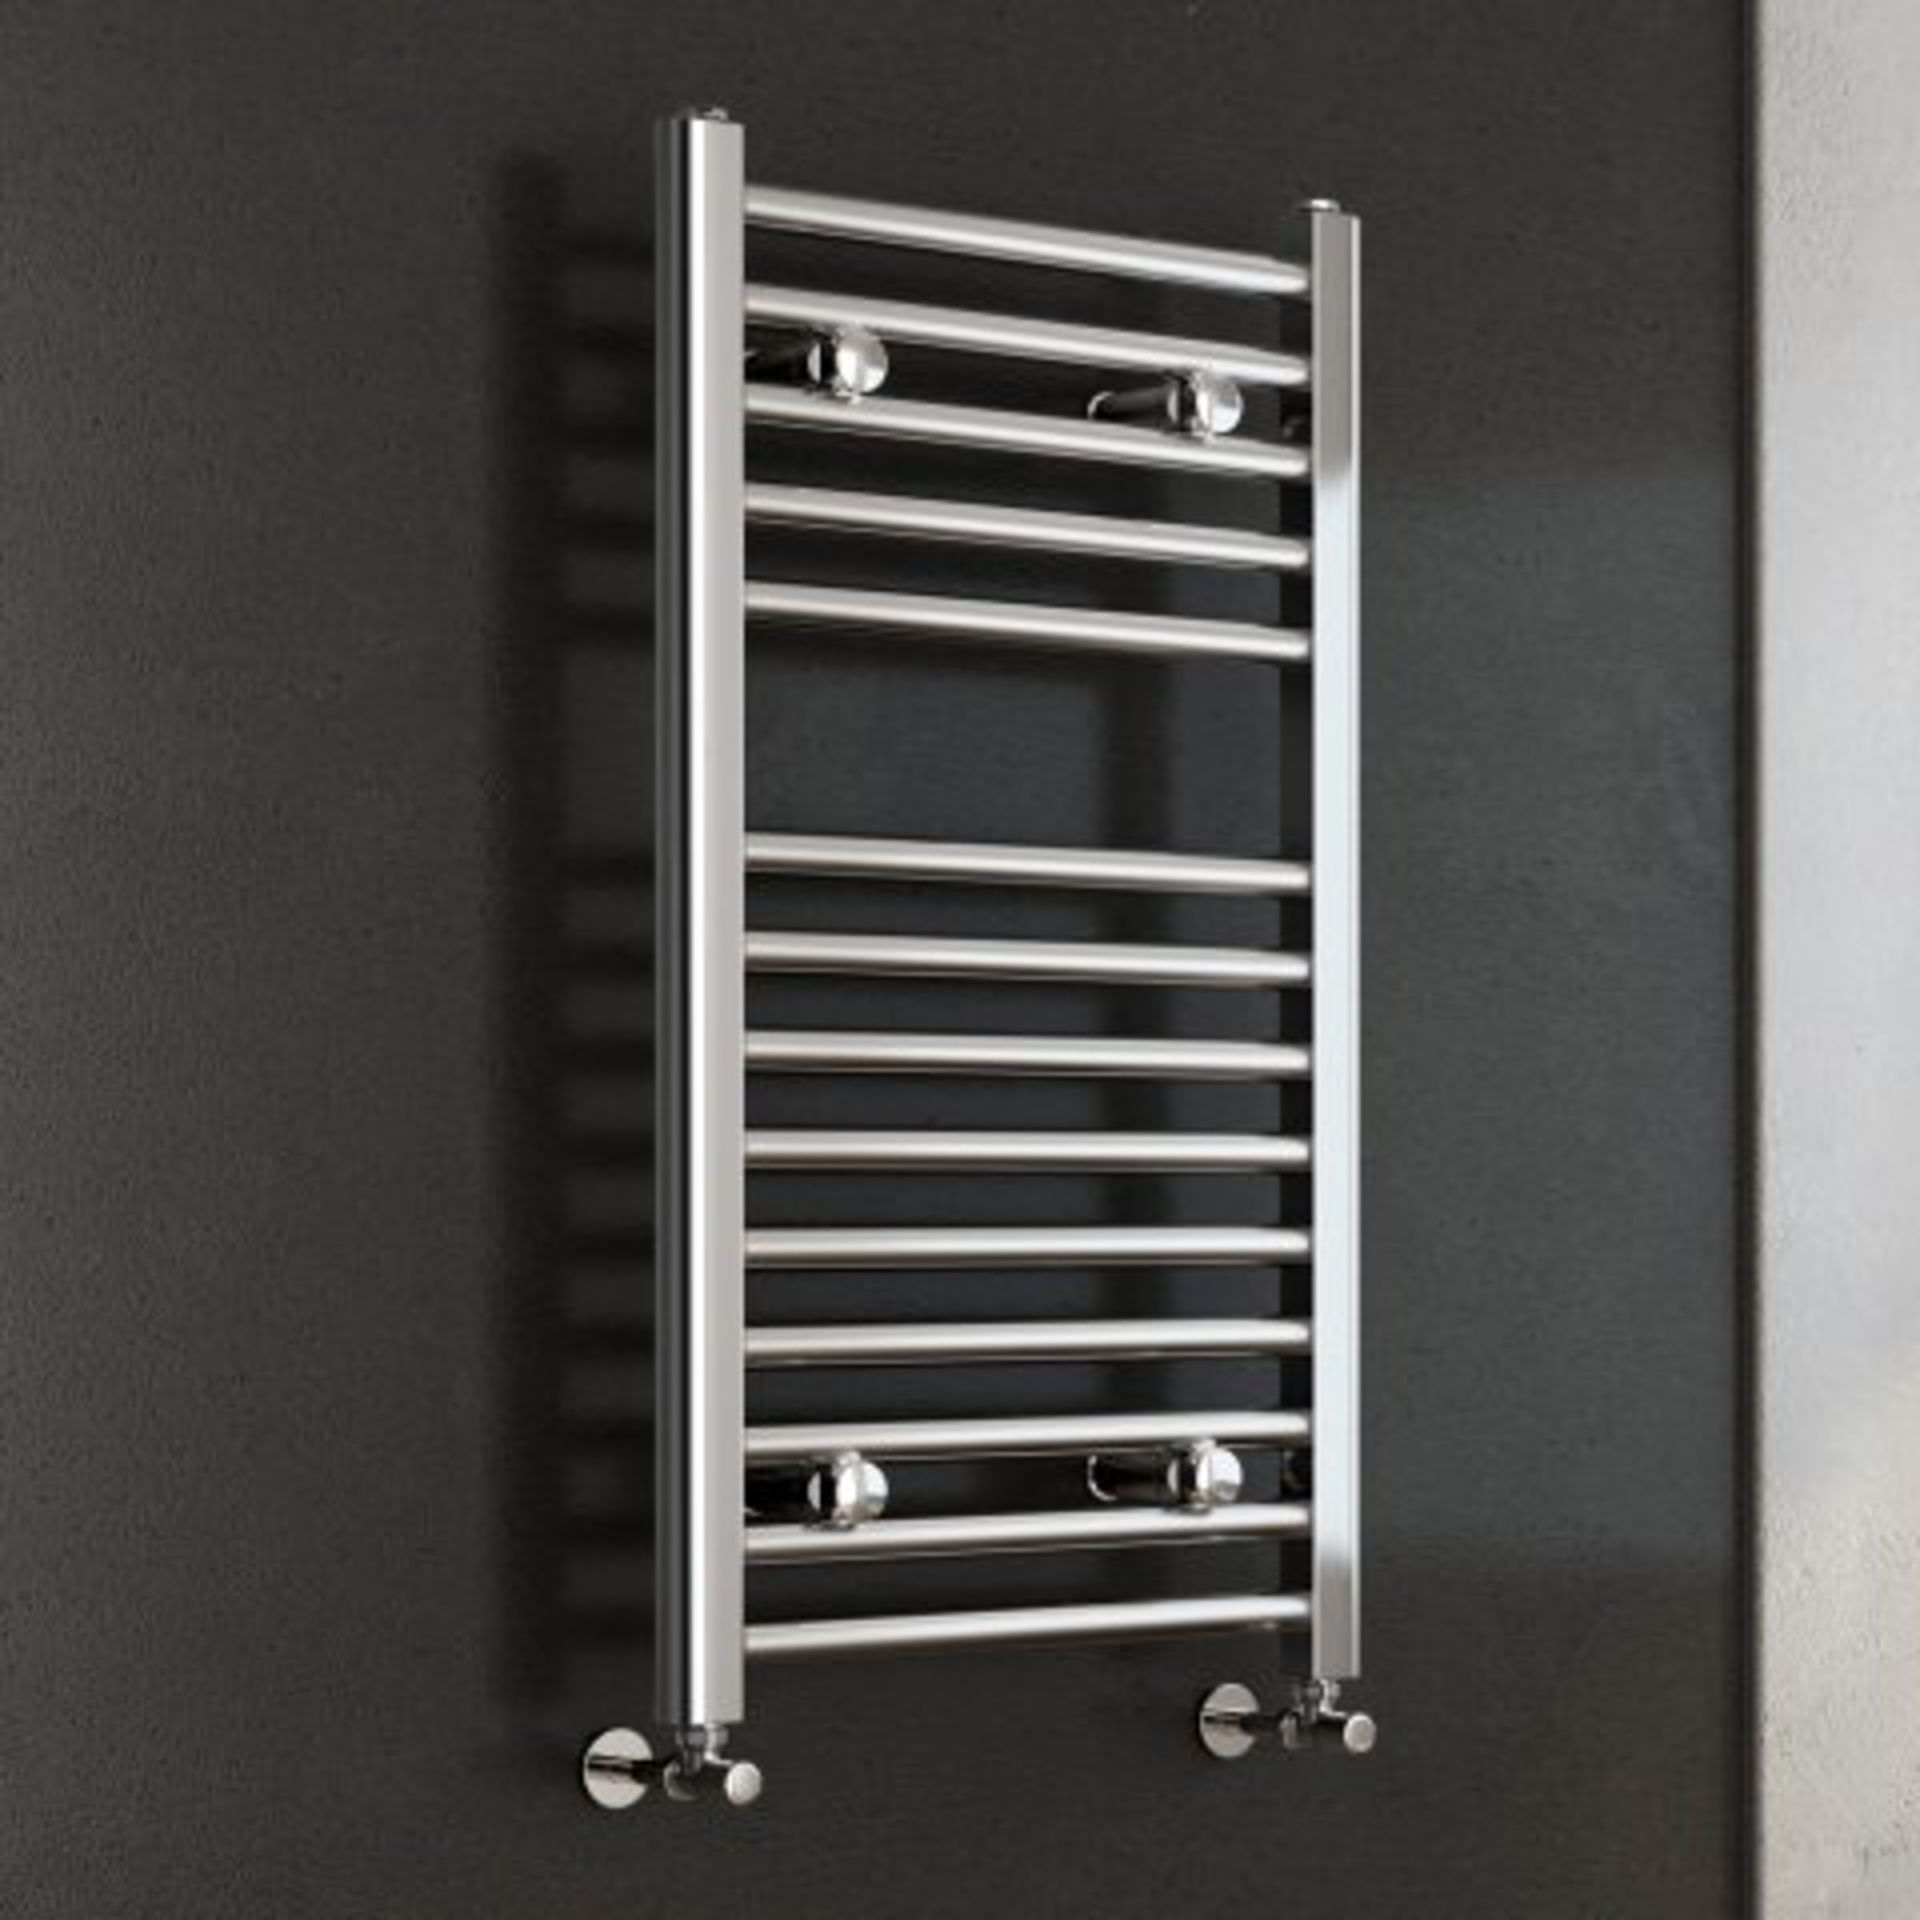 (I26) 800x450mm - 25mm Tubes - Chrome Heated Straight Rail Ladder Towel Radiators . Benefit from the